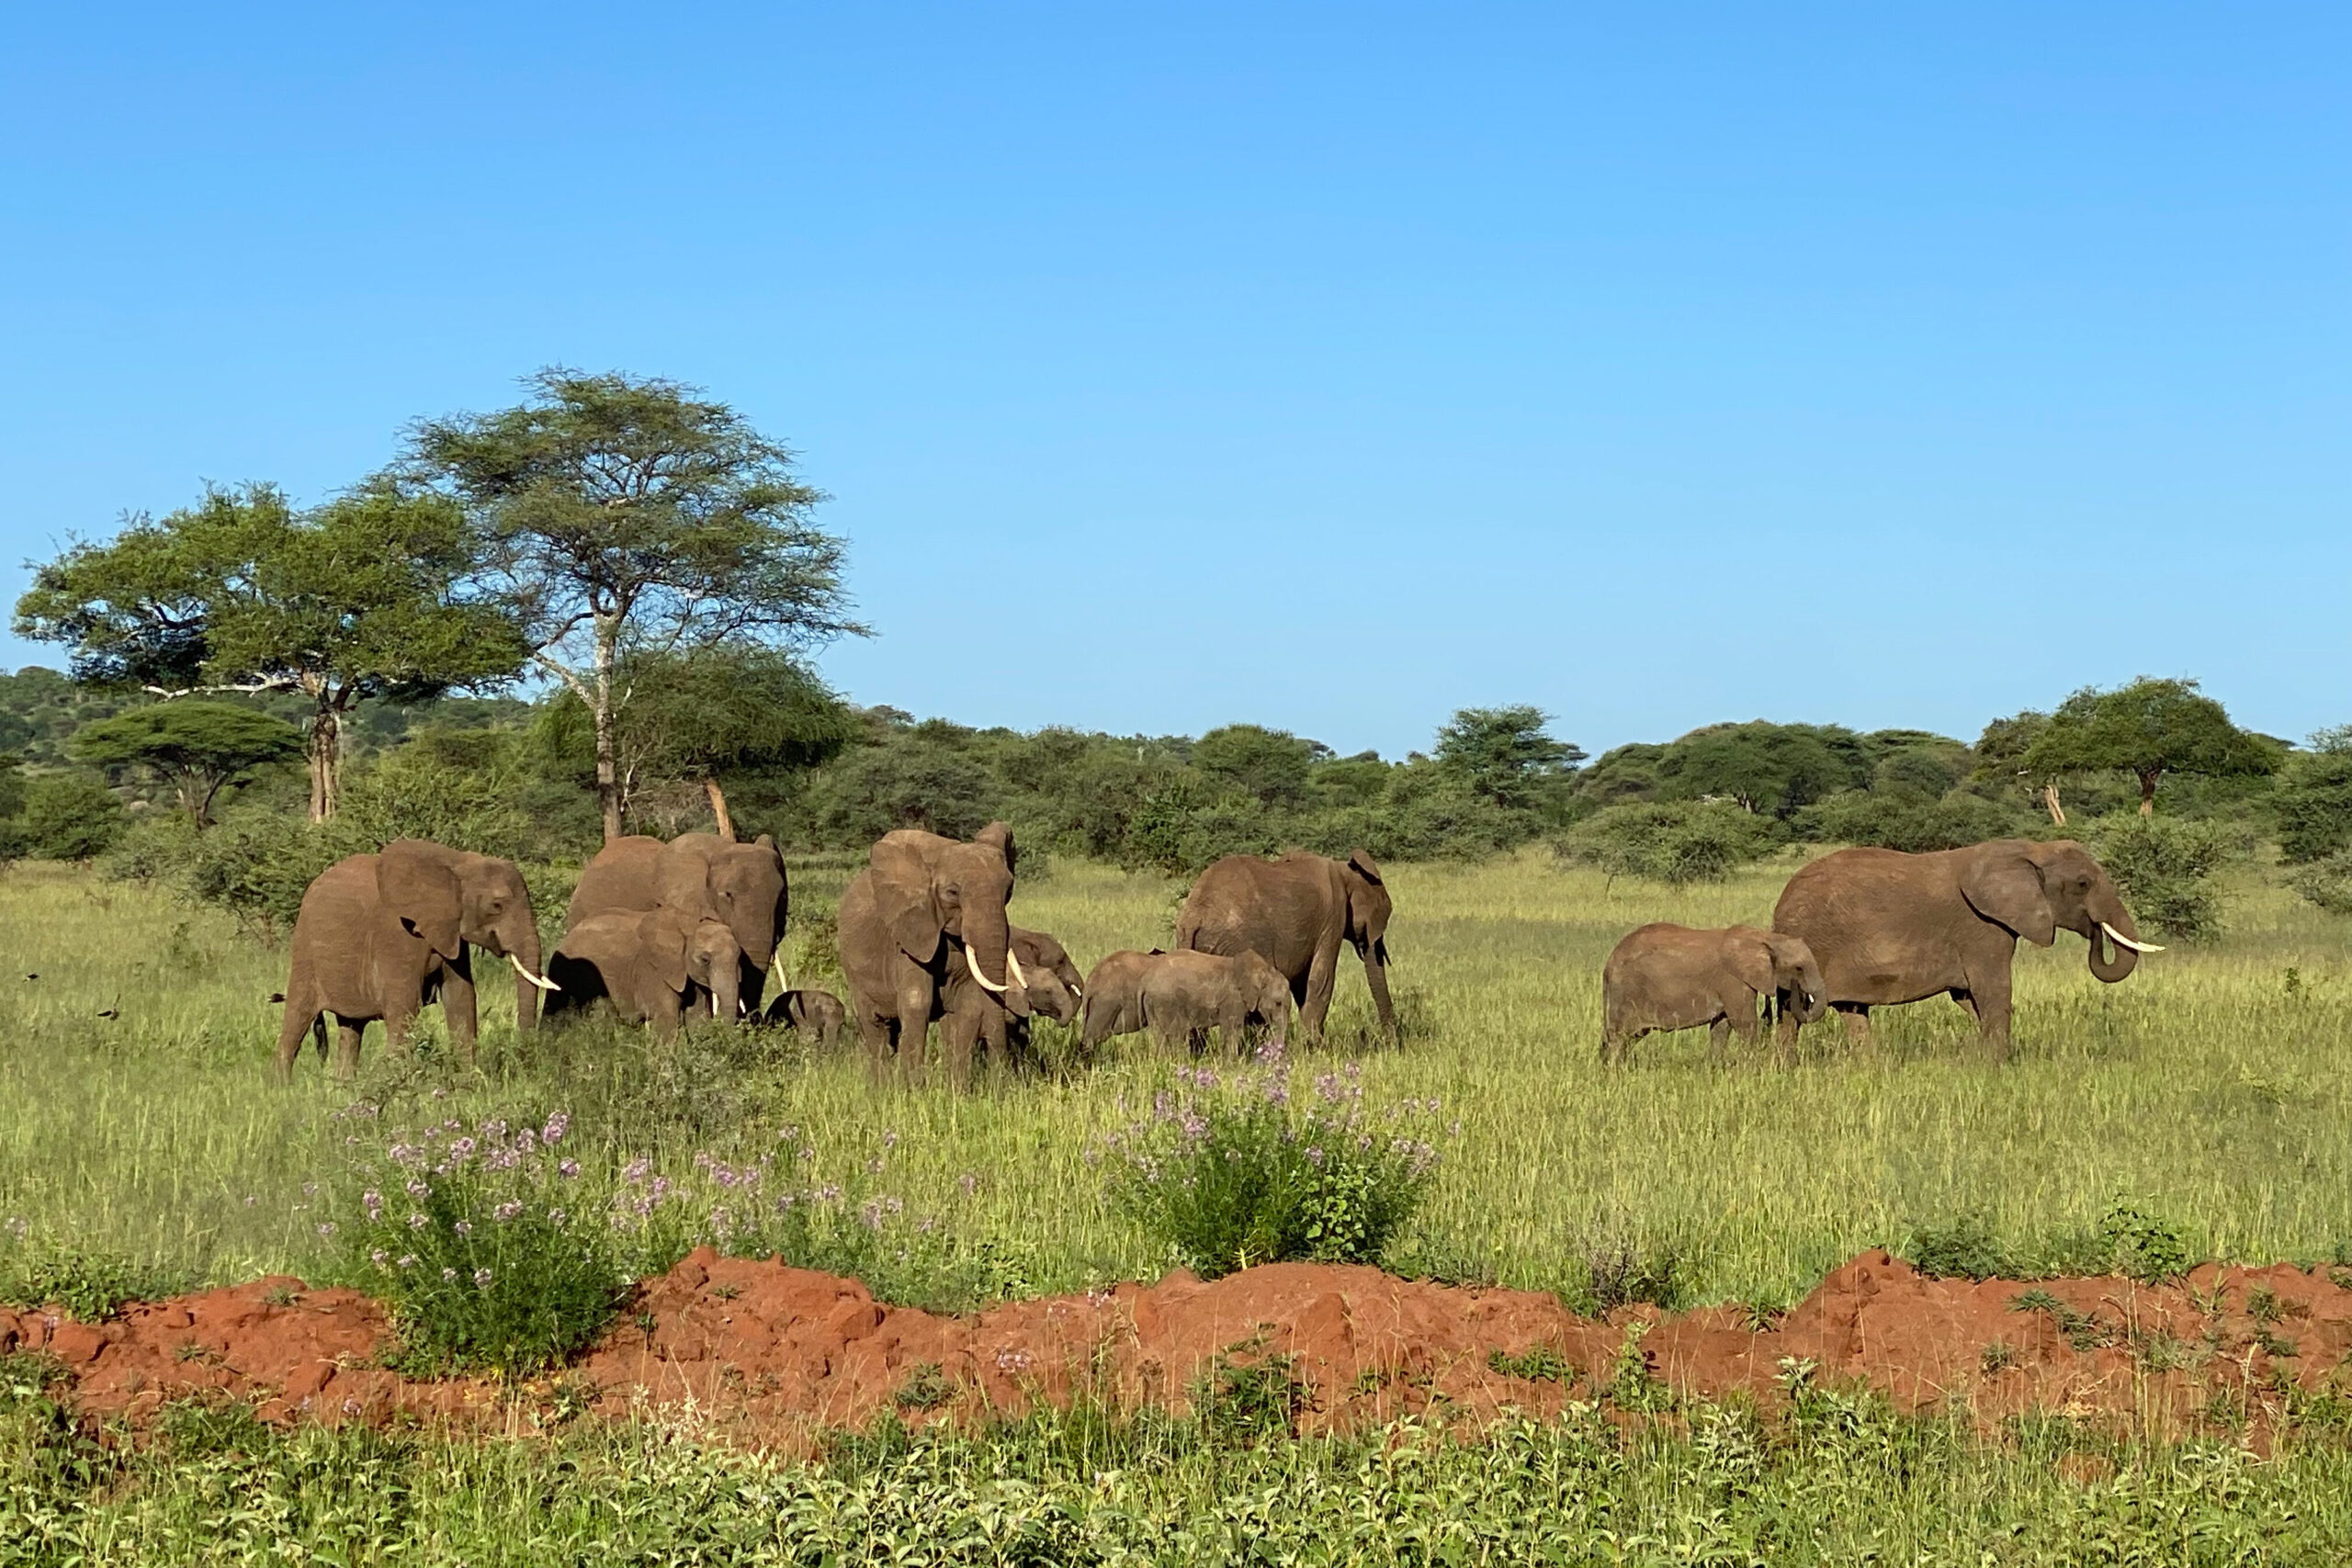 Herd of elephants on the plains of Tanzania